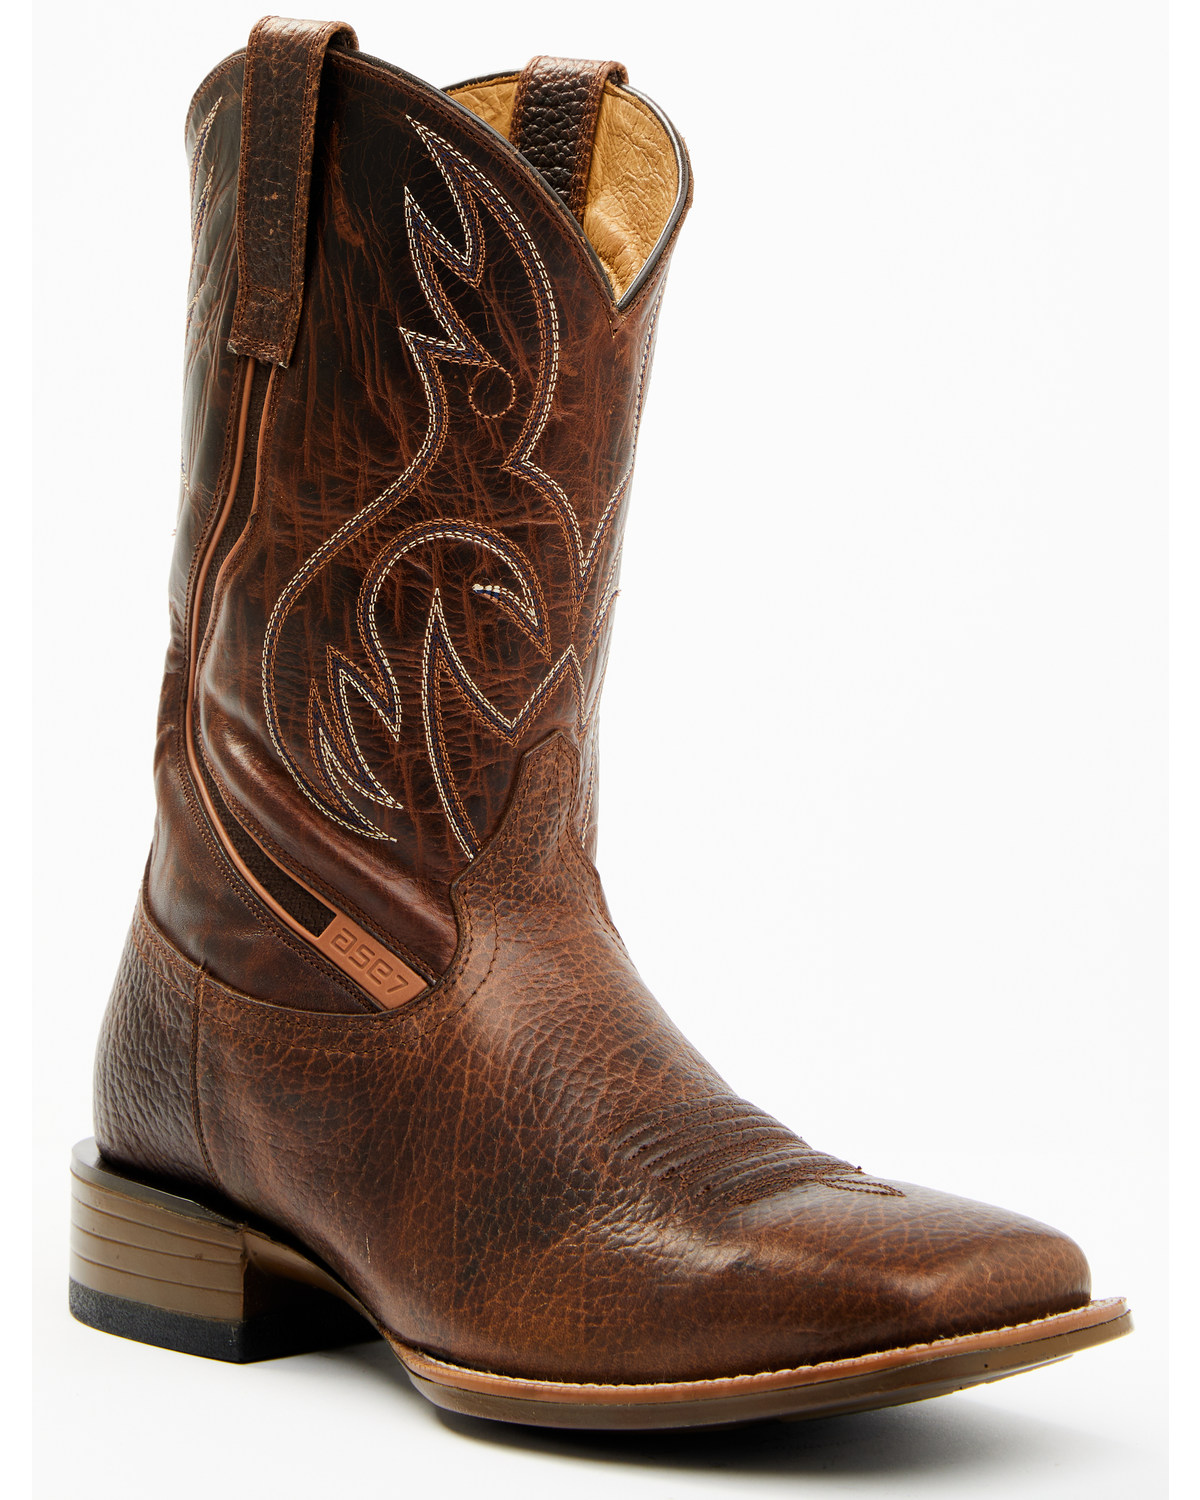 Cody James Men's Hoverfly ASE7 Western Performance Boots - Broad Square Toe